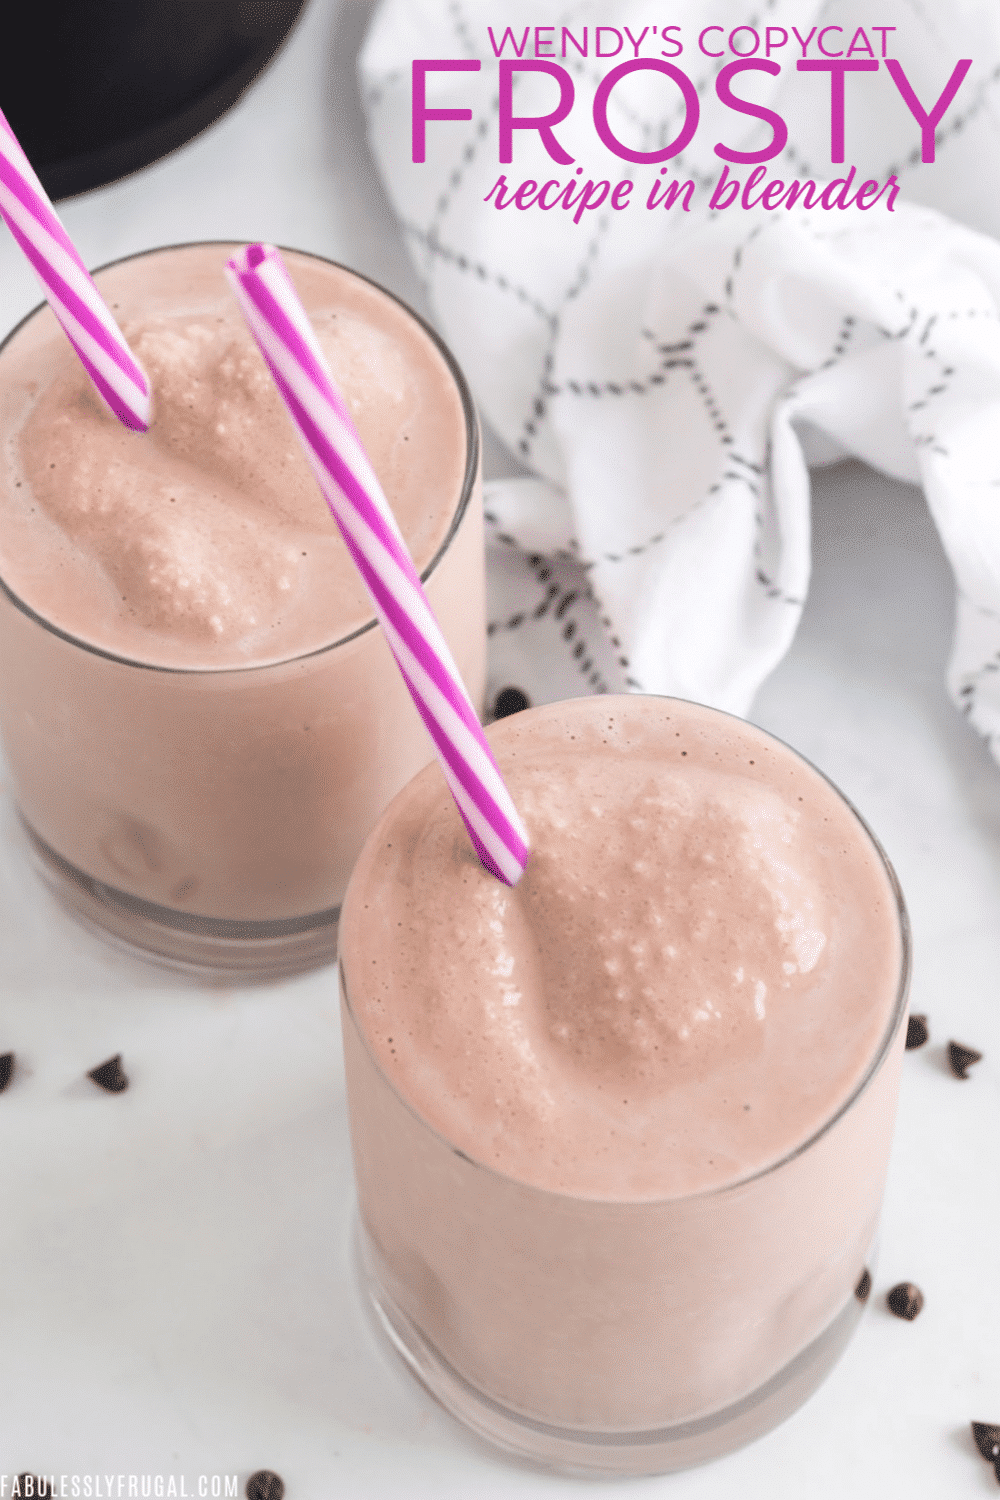 Two cups of homemade chocolate frosty recipe